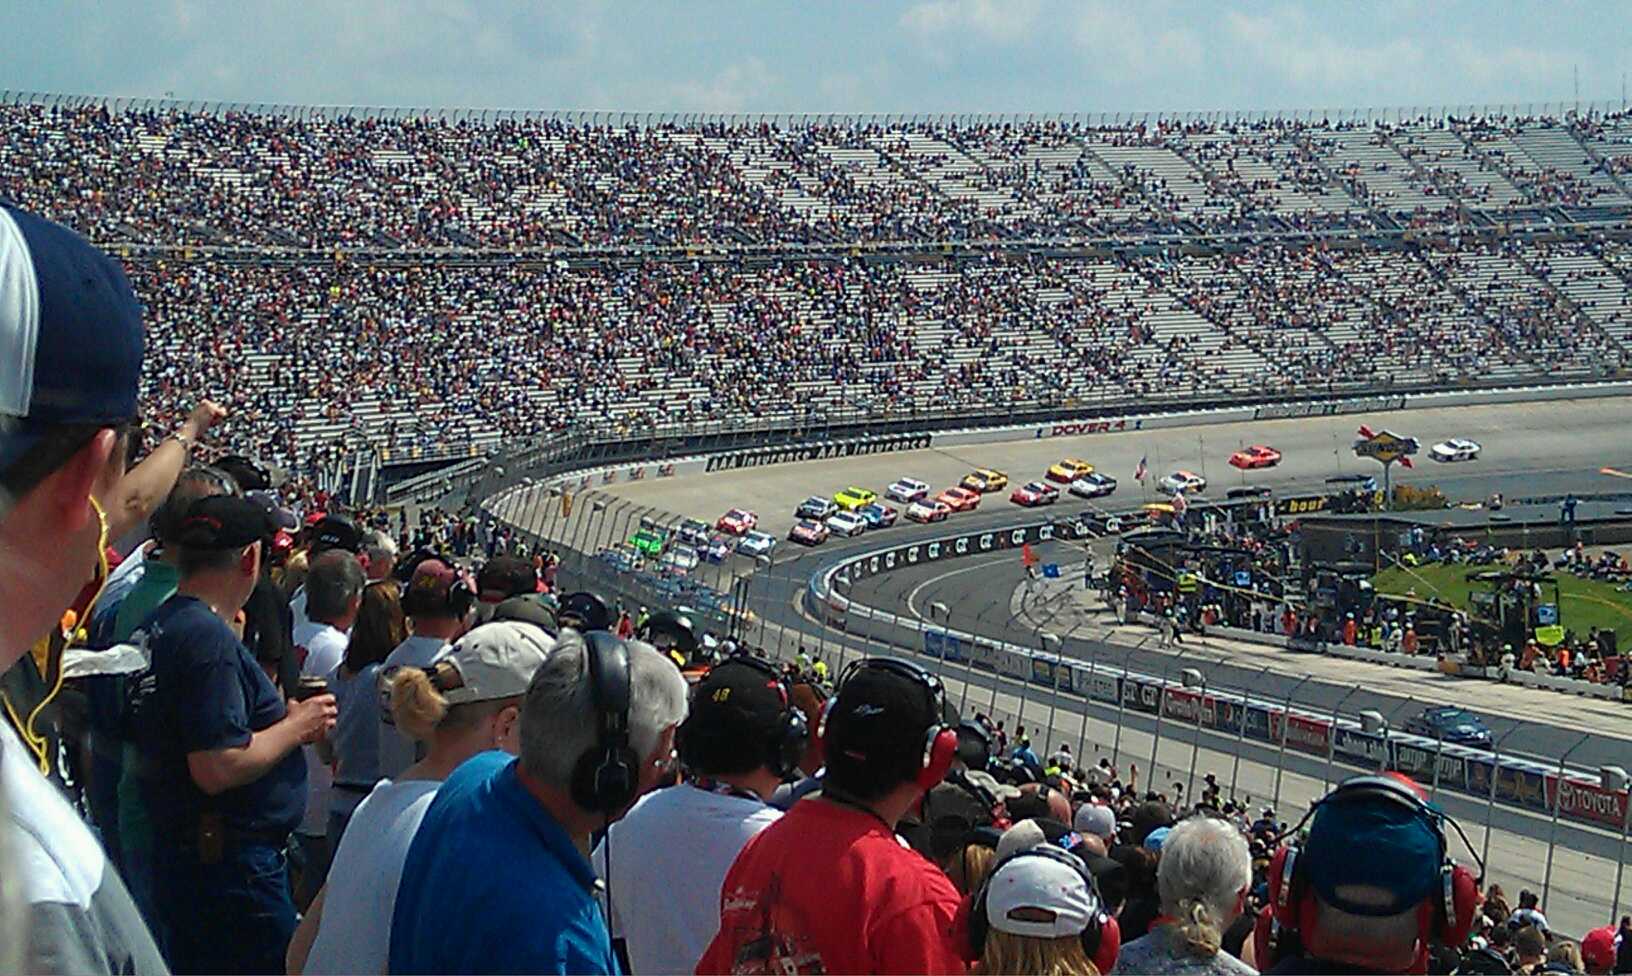 Dover International Speedway section Petty 249 row 33 seat 34 shared